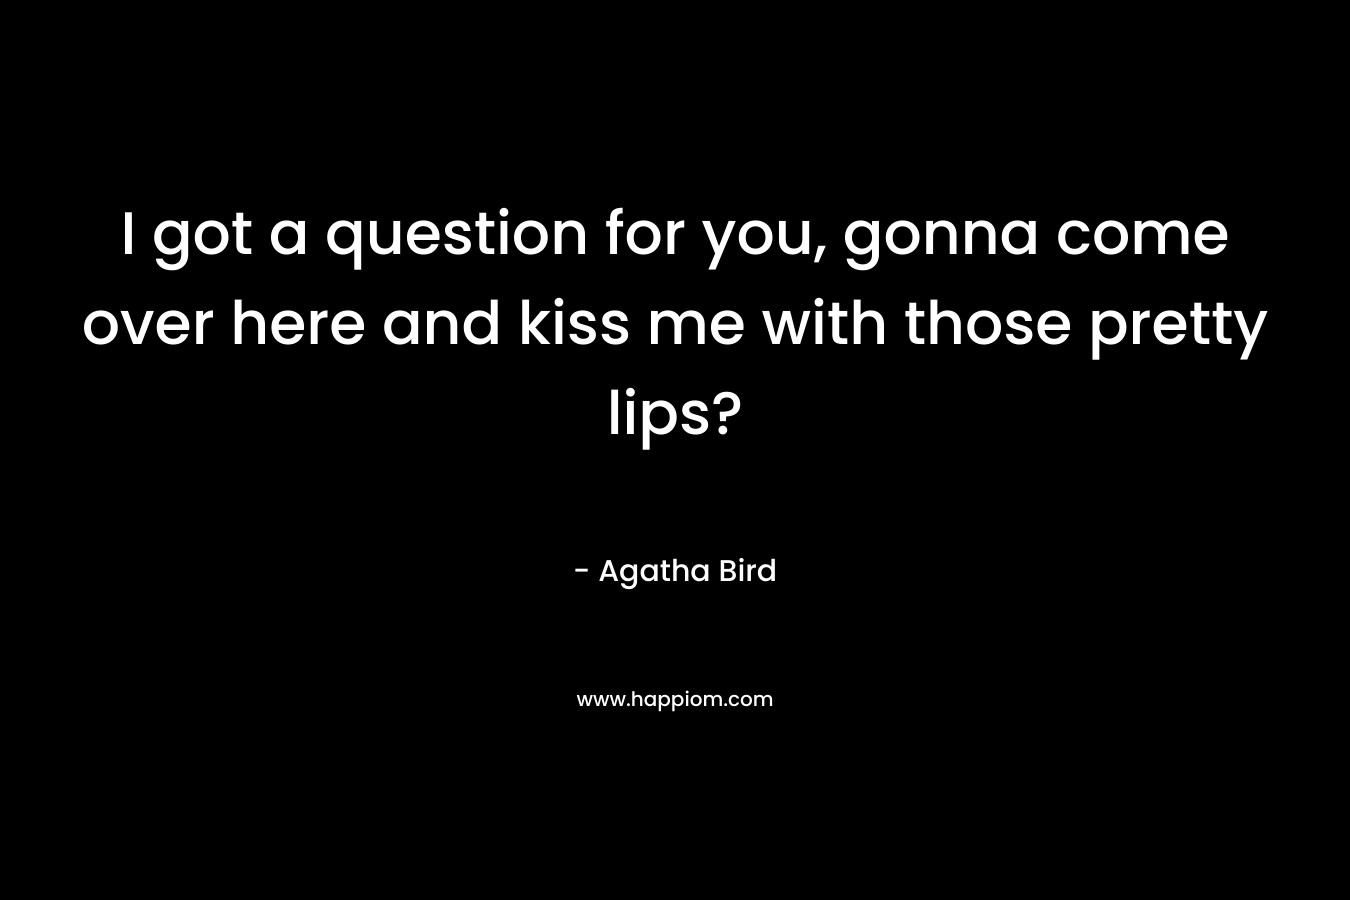 I got a question for you, gonna come over here and kiss me with those pretty lips?